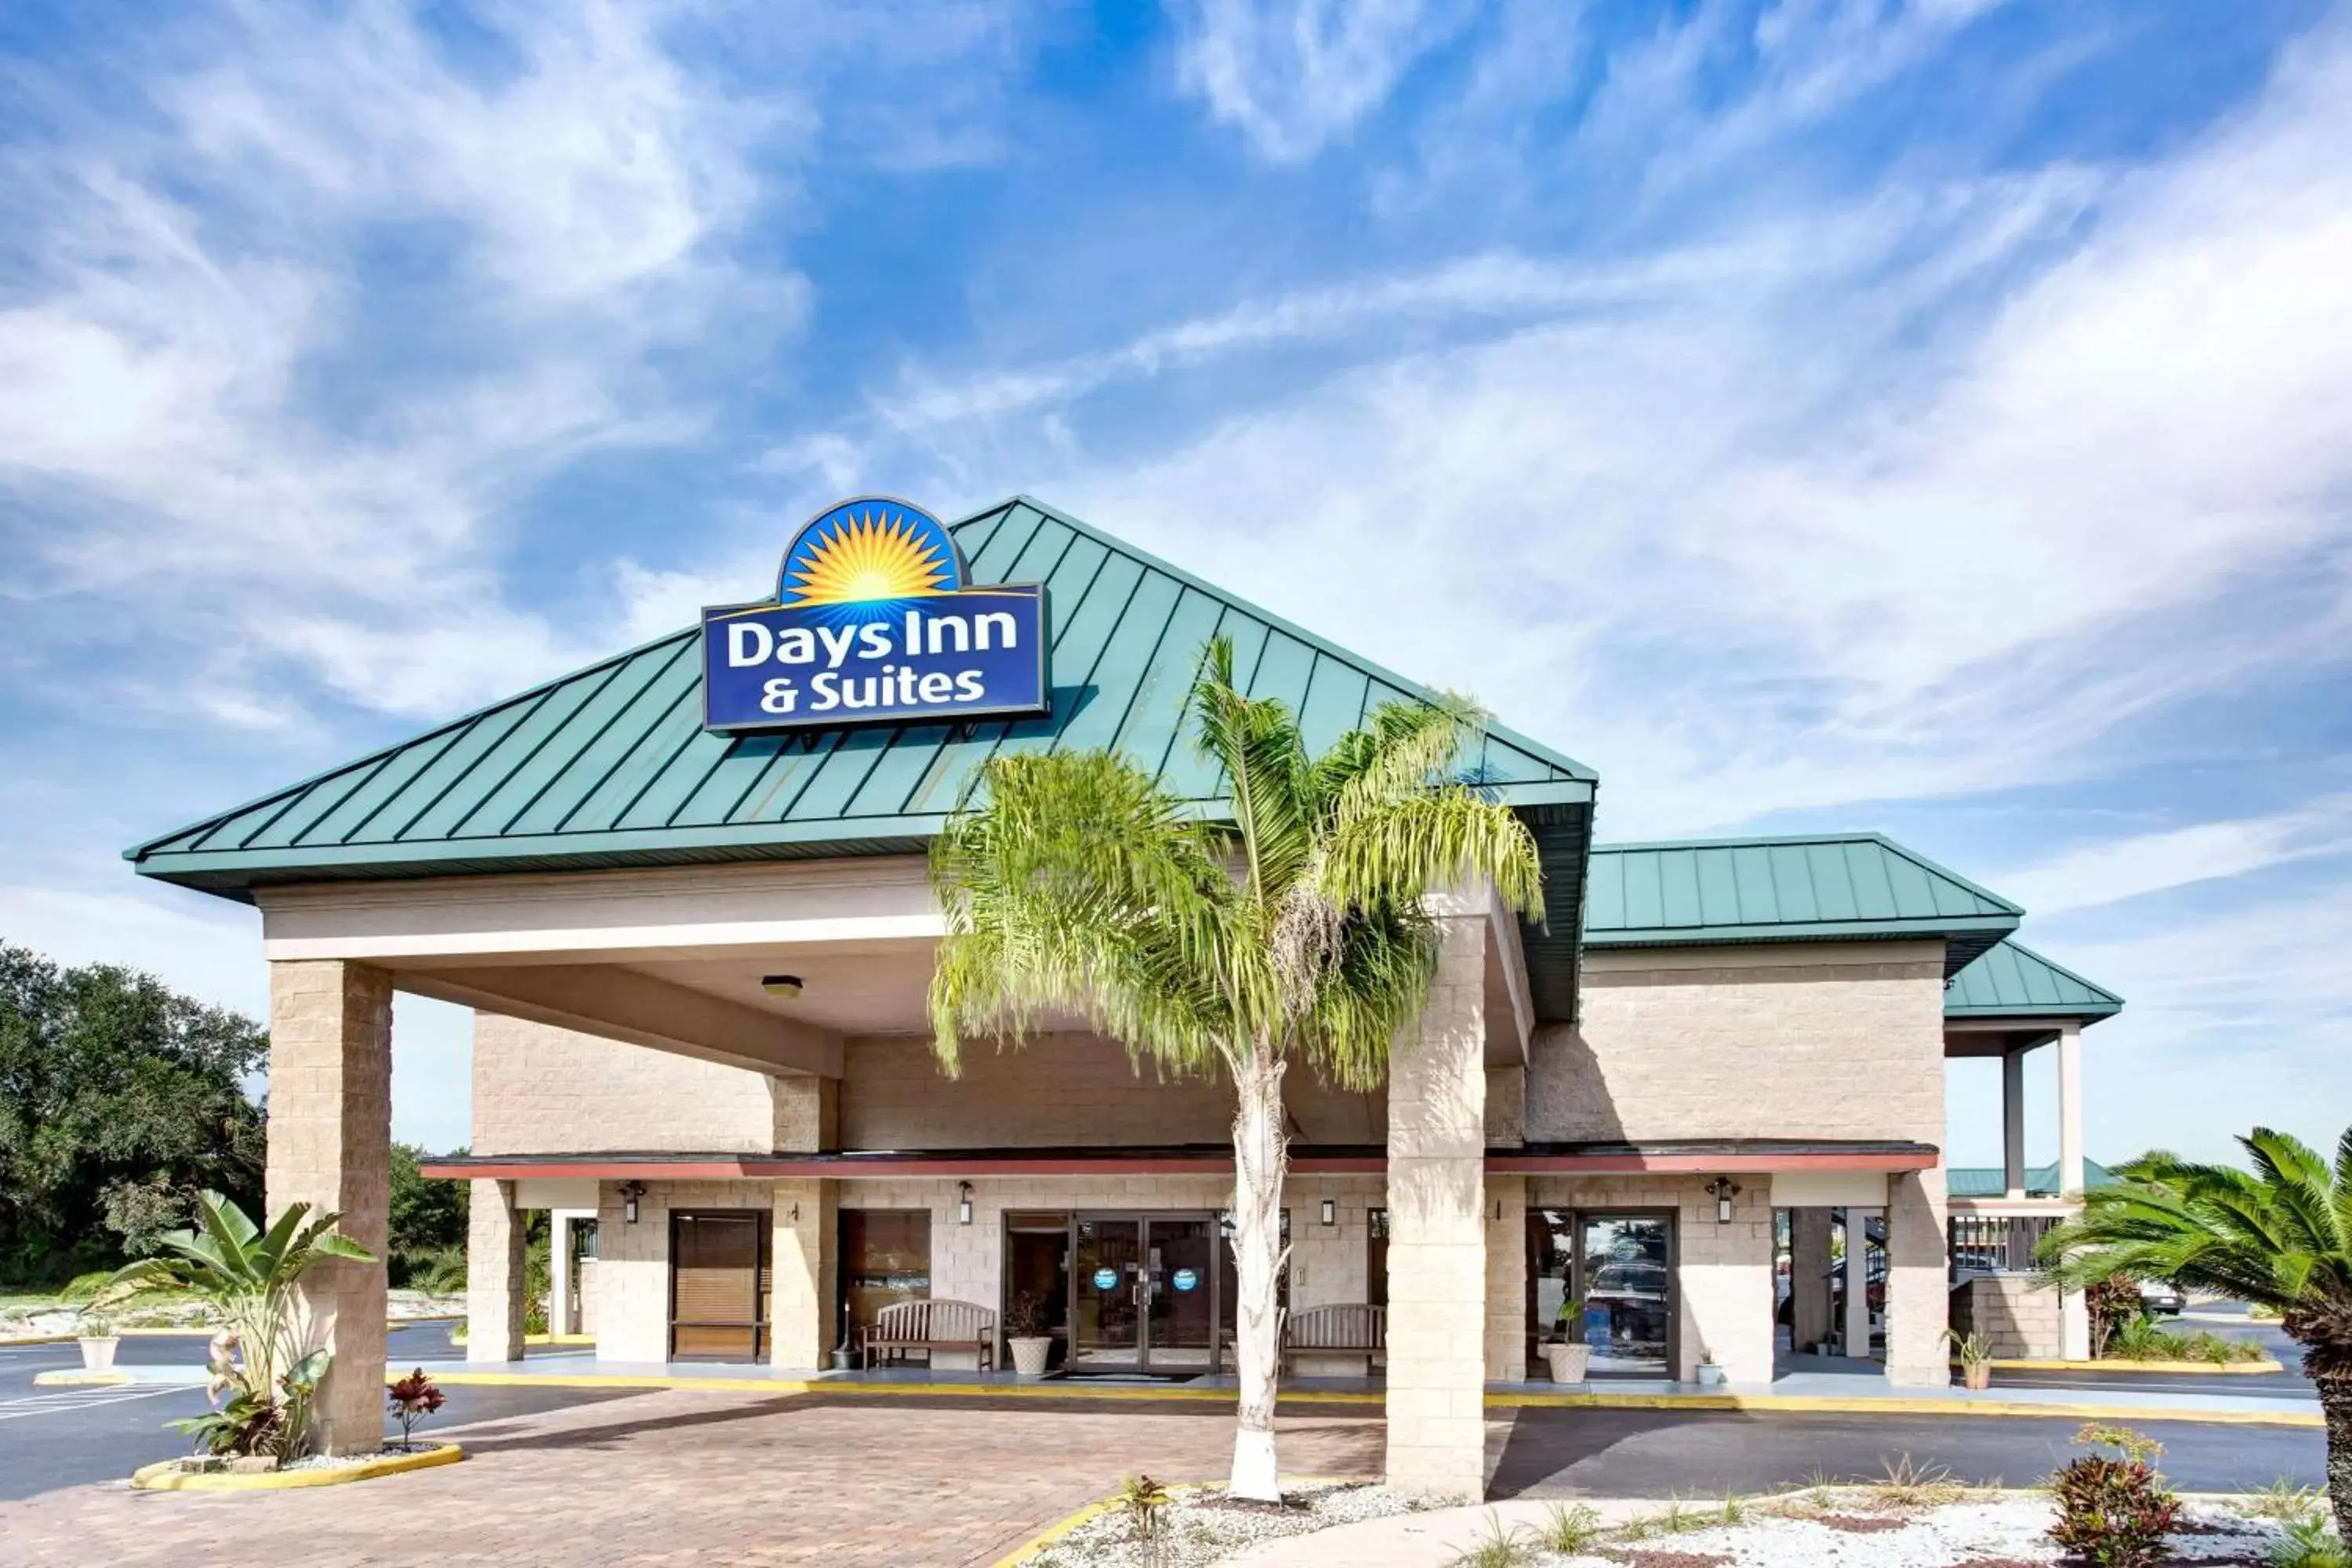 Property building in Days Inn & Suites by Wyndham Davenport